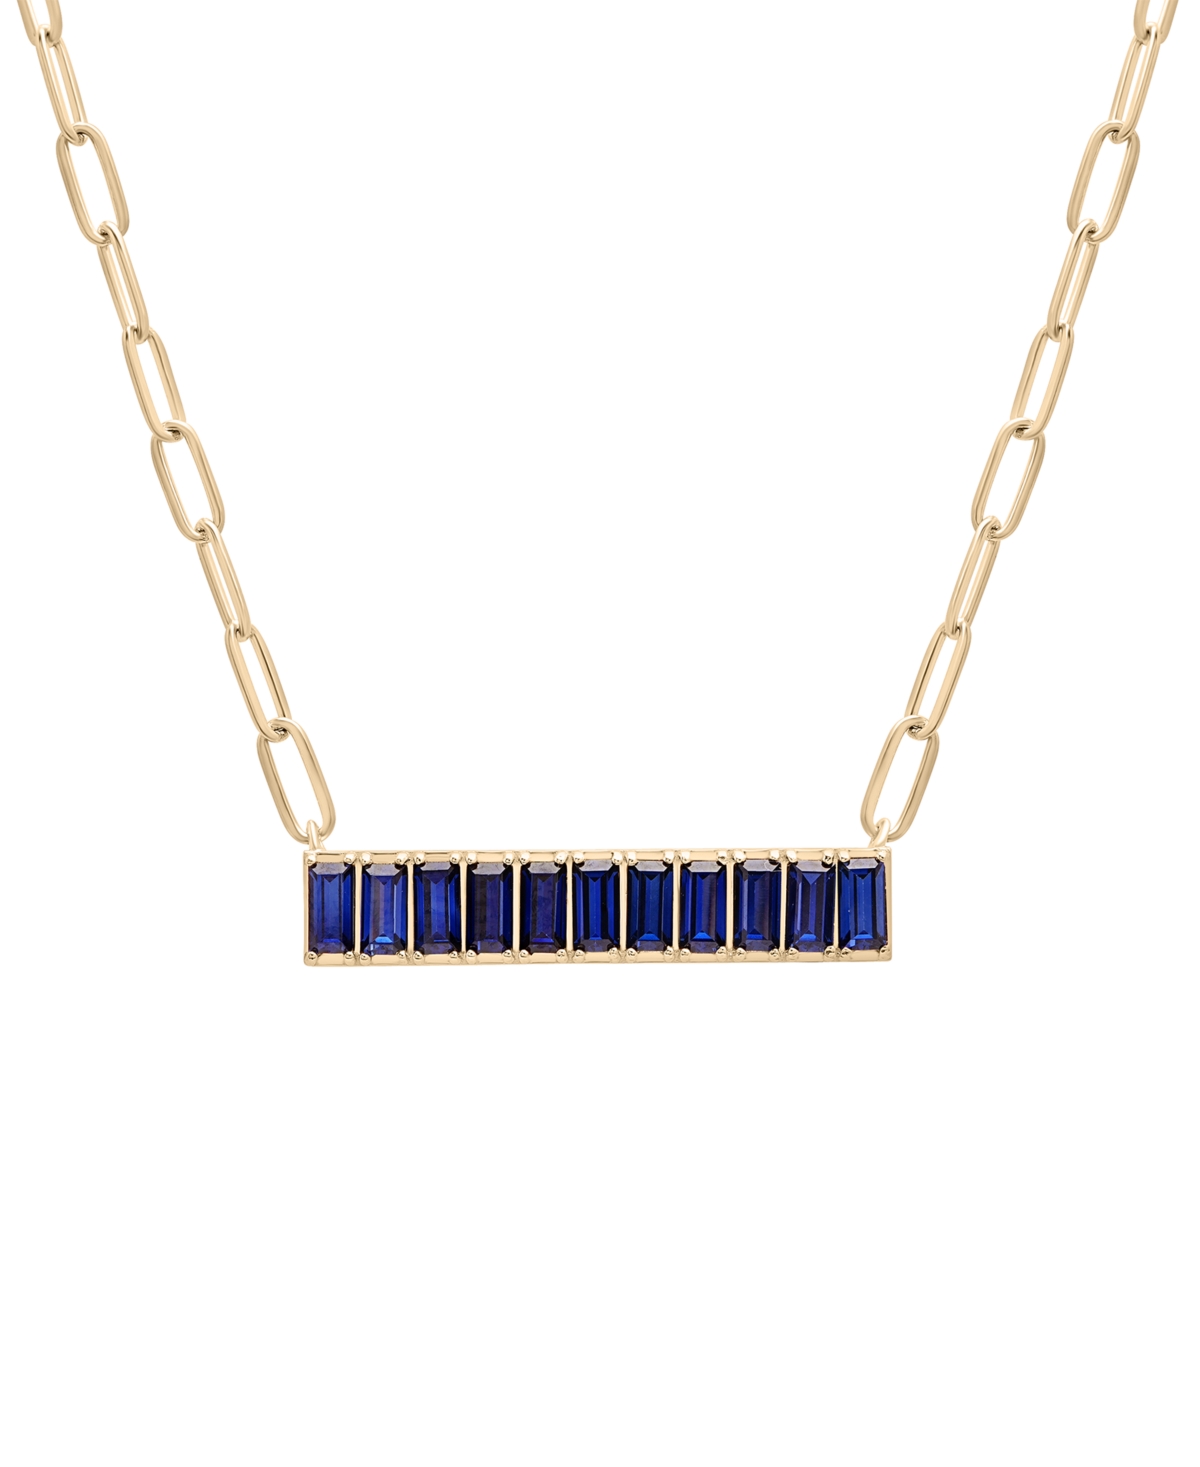 Audrey By Aurate Nano Emerald Color Baguette Bar Pendant Necklace (1 Ct. T.w.) In Gold Vermeil, 17" (also In Nano Whi In Blue